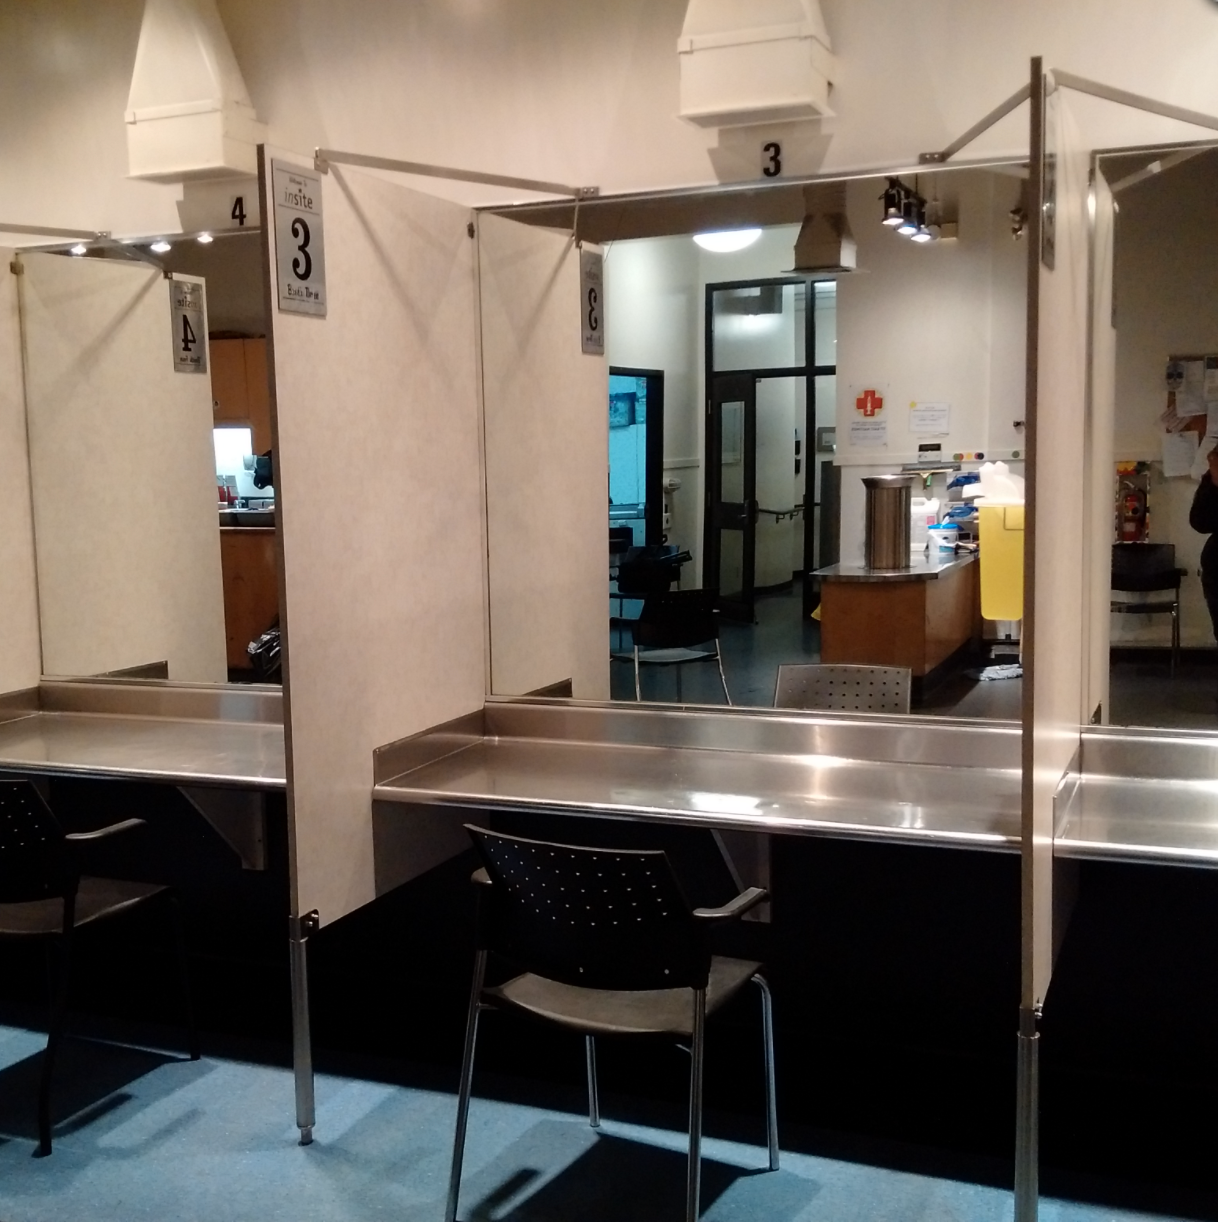  Injection booths  http://www.vch.ca/public-health/harm-reduction/supervised-consumption-sites.  